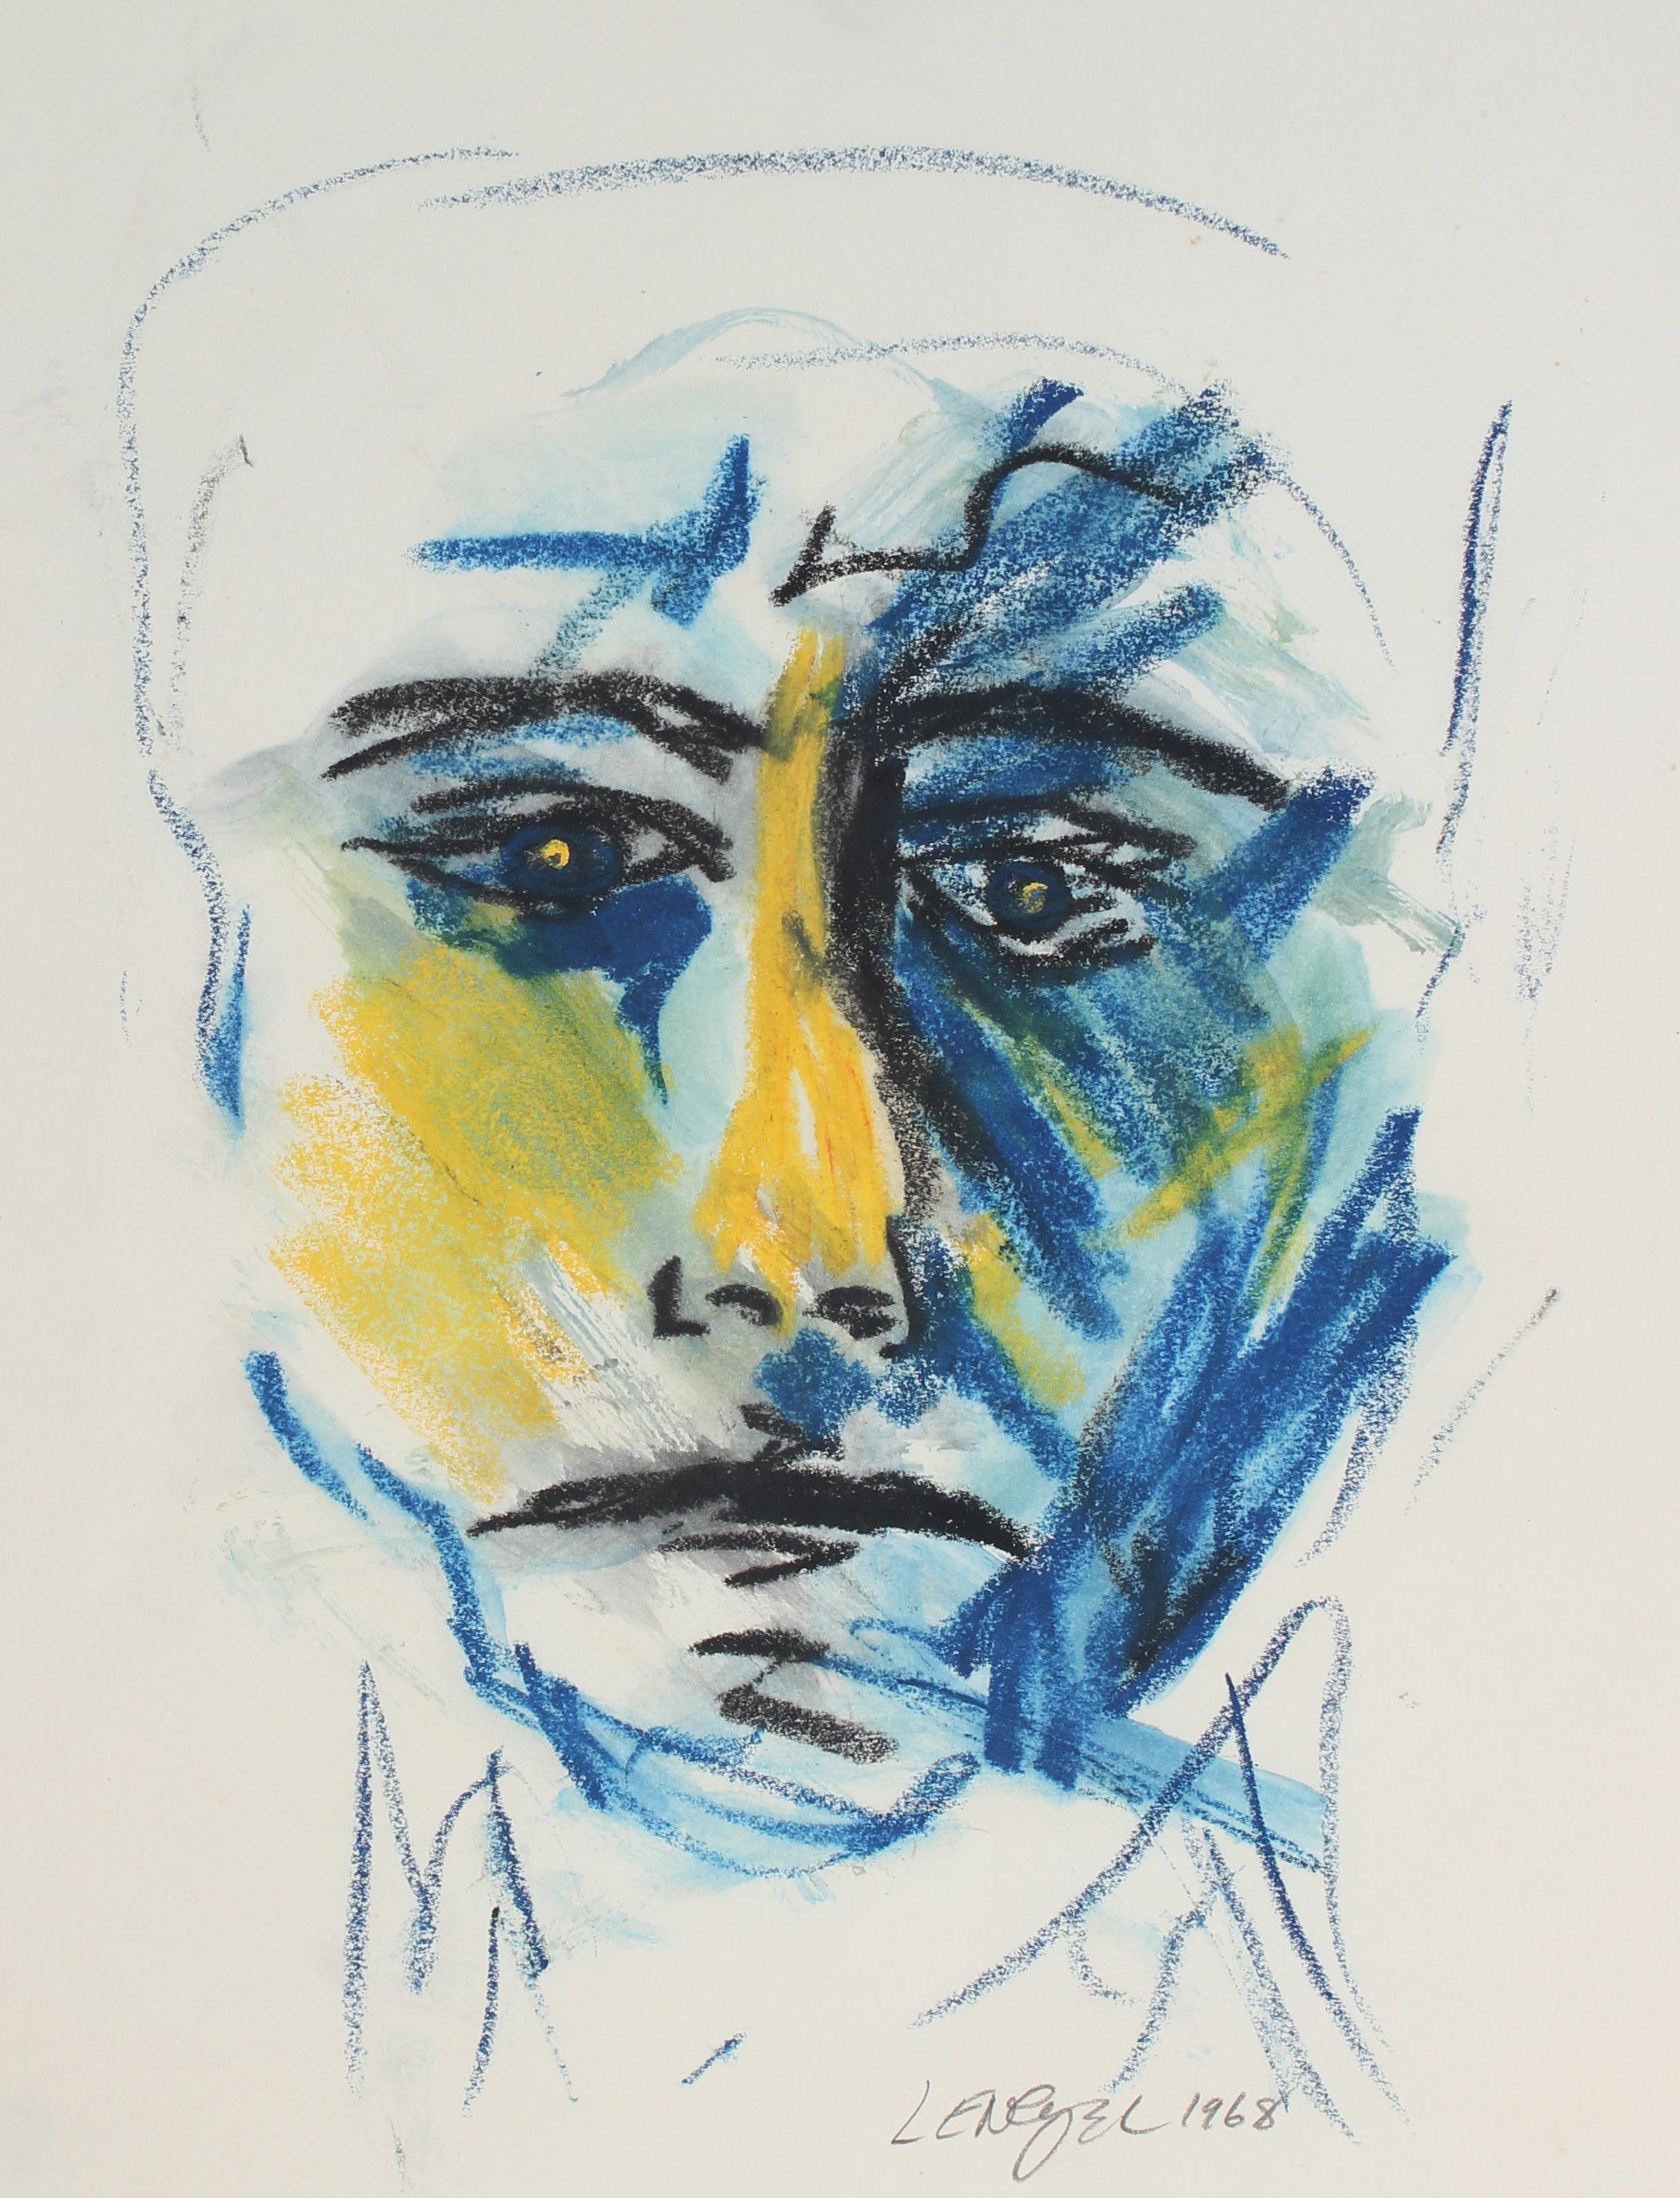 Oil Pastel Portrait of a Man w Blue Yellow Black Features, American Modern, 1968 - Art by Laura Lengyel